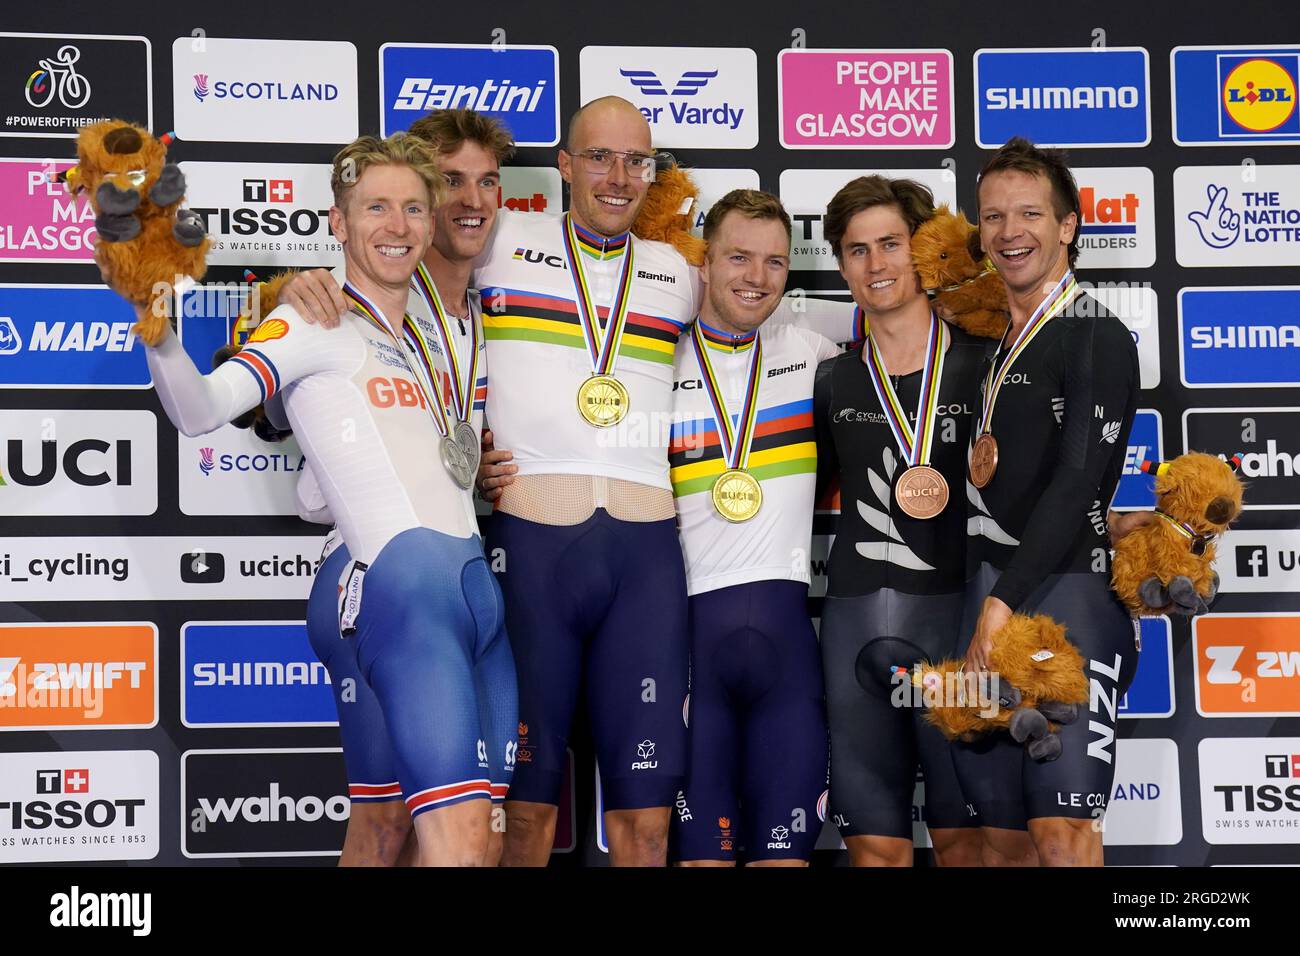 The Netherlands' Jan Willem van Schip and Yoeri Havik (centre) celebrate winning gold in the Elite Men's Madison alongside Great Britain's Mark Stewart and Oliver Wood with the silver medal (left) and New Zealand's Aaron Gate and Campbell Stewart with bronze during day six of the 2023 UCI Cycling World Championships at the Sir Chris Hoy Velodrome, Glasgow. Picture date: Tuesday August 8, 2023. Stock Photo